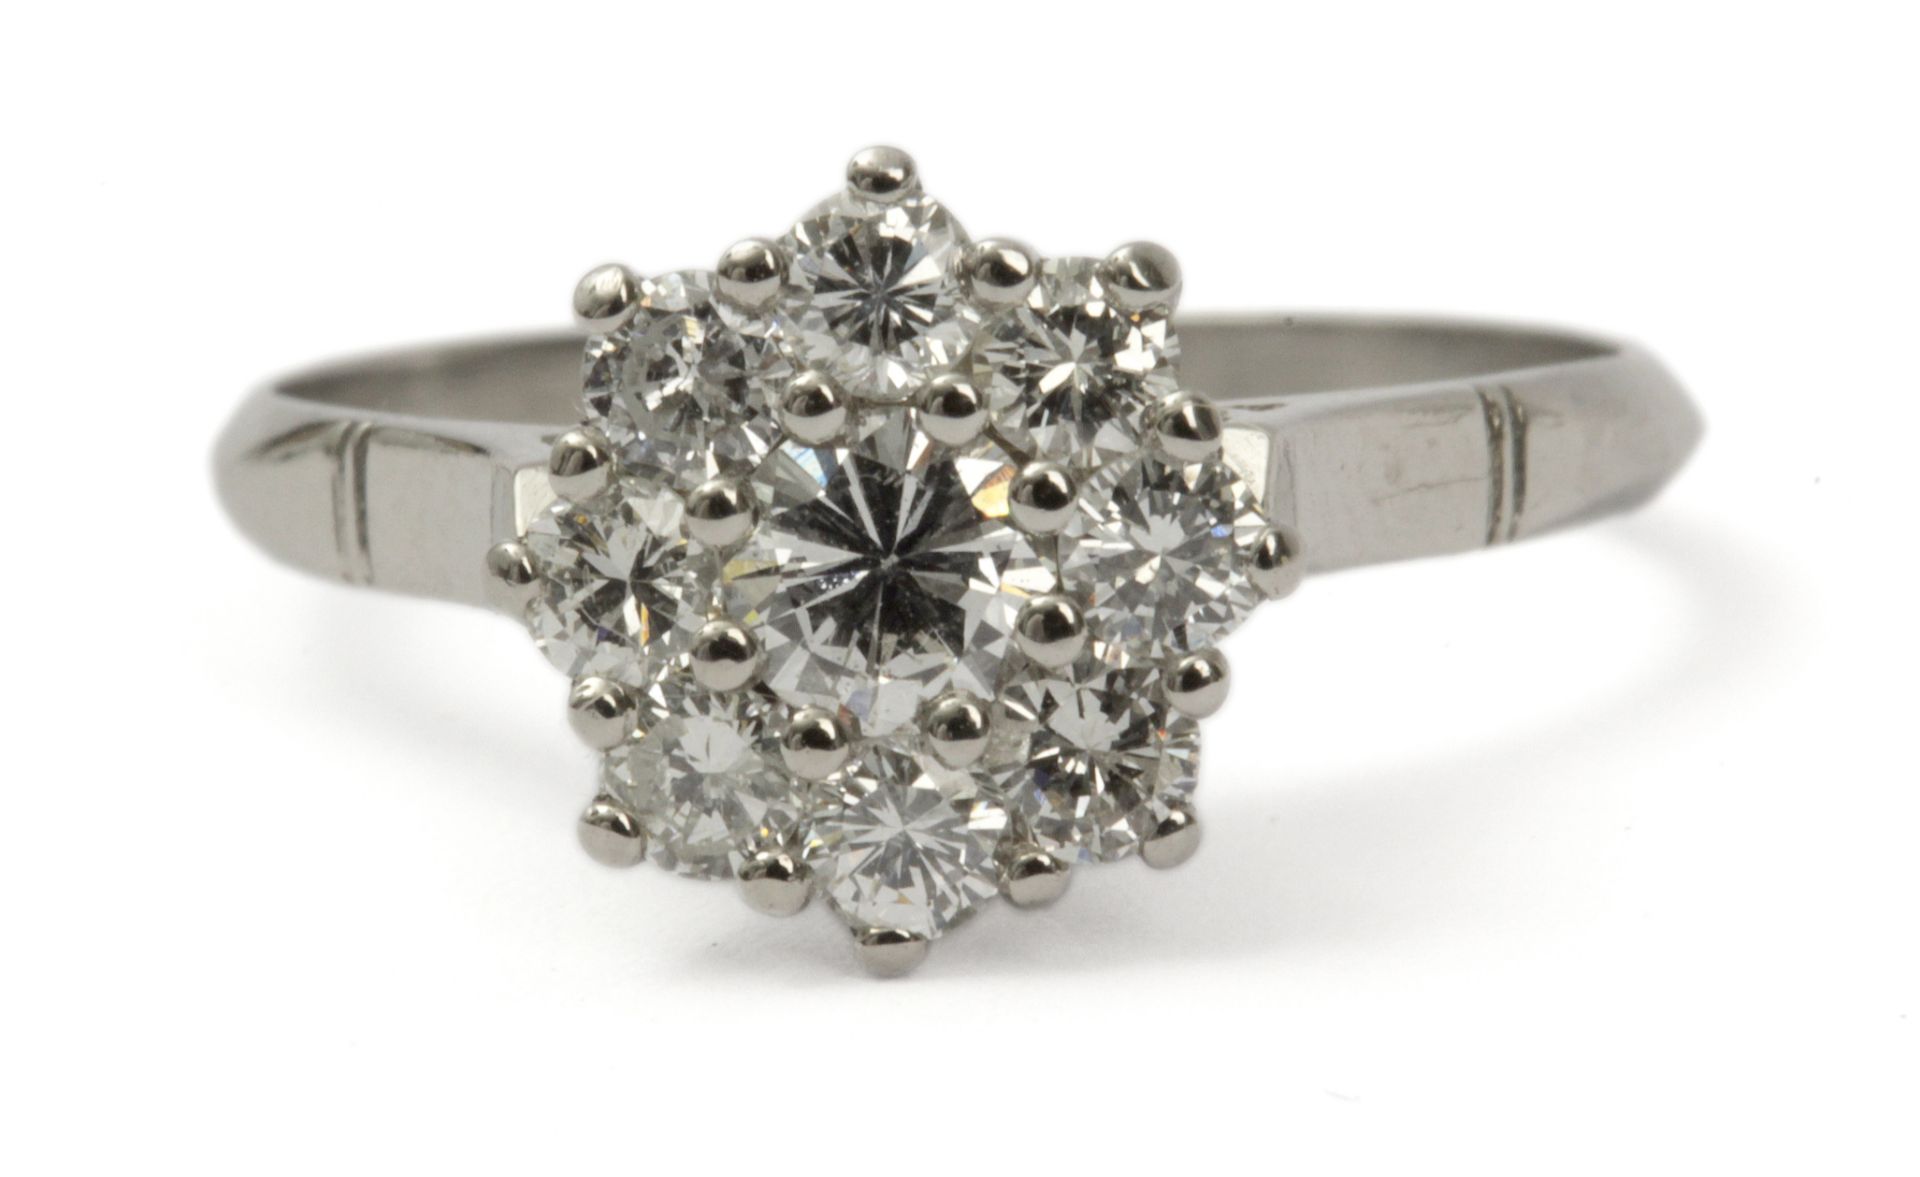 Diamond cluster ring with a platinum setting